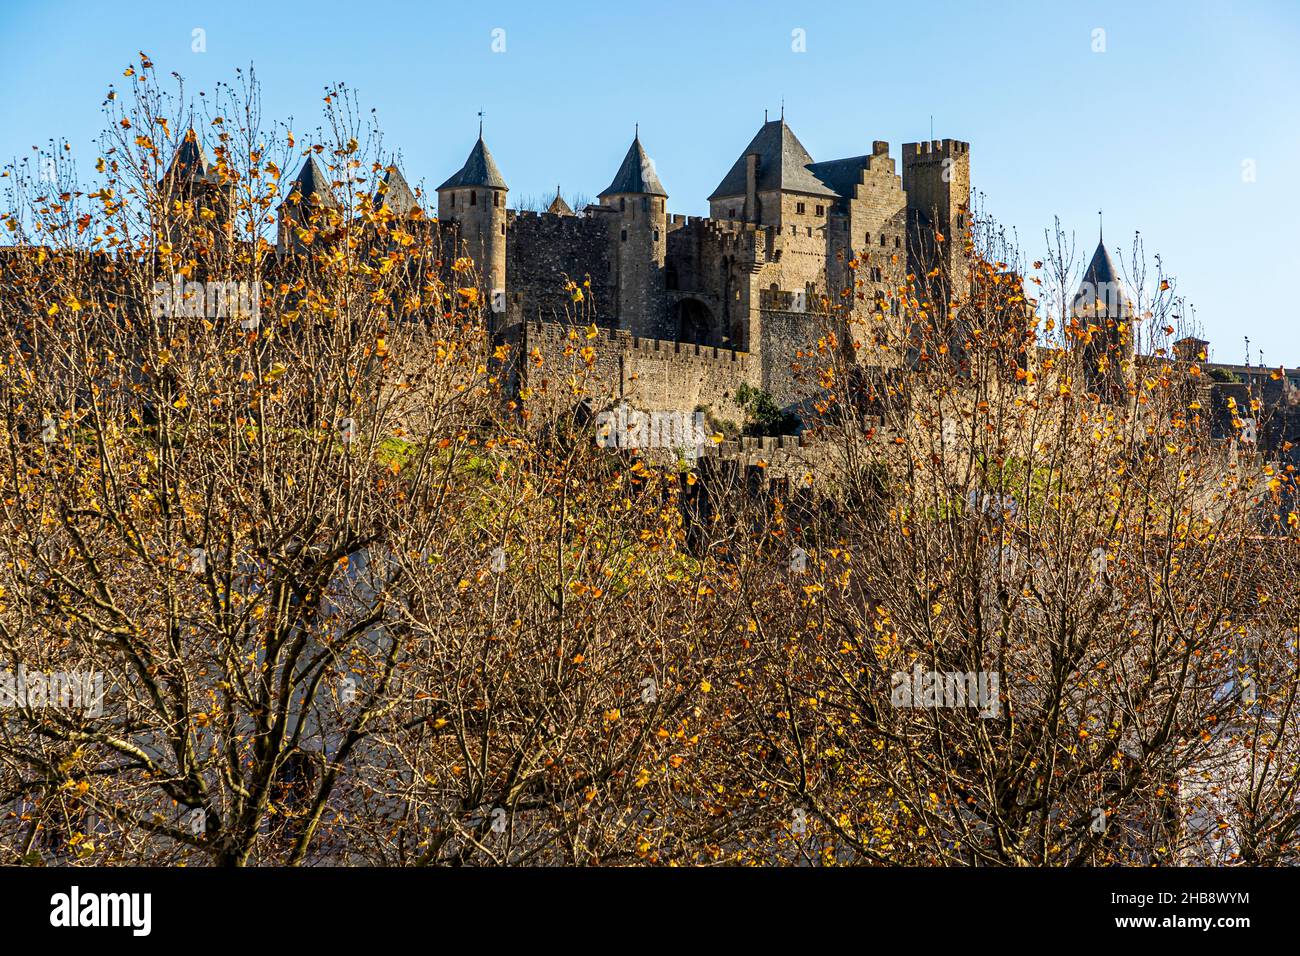 The old town fortress of Carcassonne is located behind the 14th century Pont Vieux, which crosses the river Aude Stock Photo